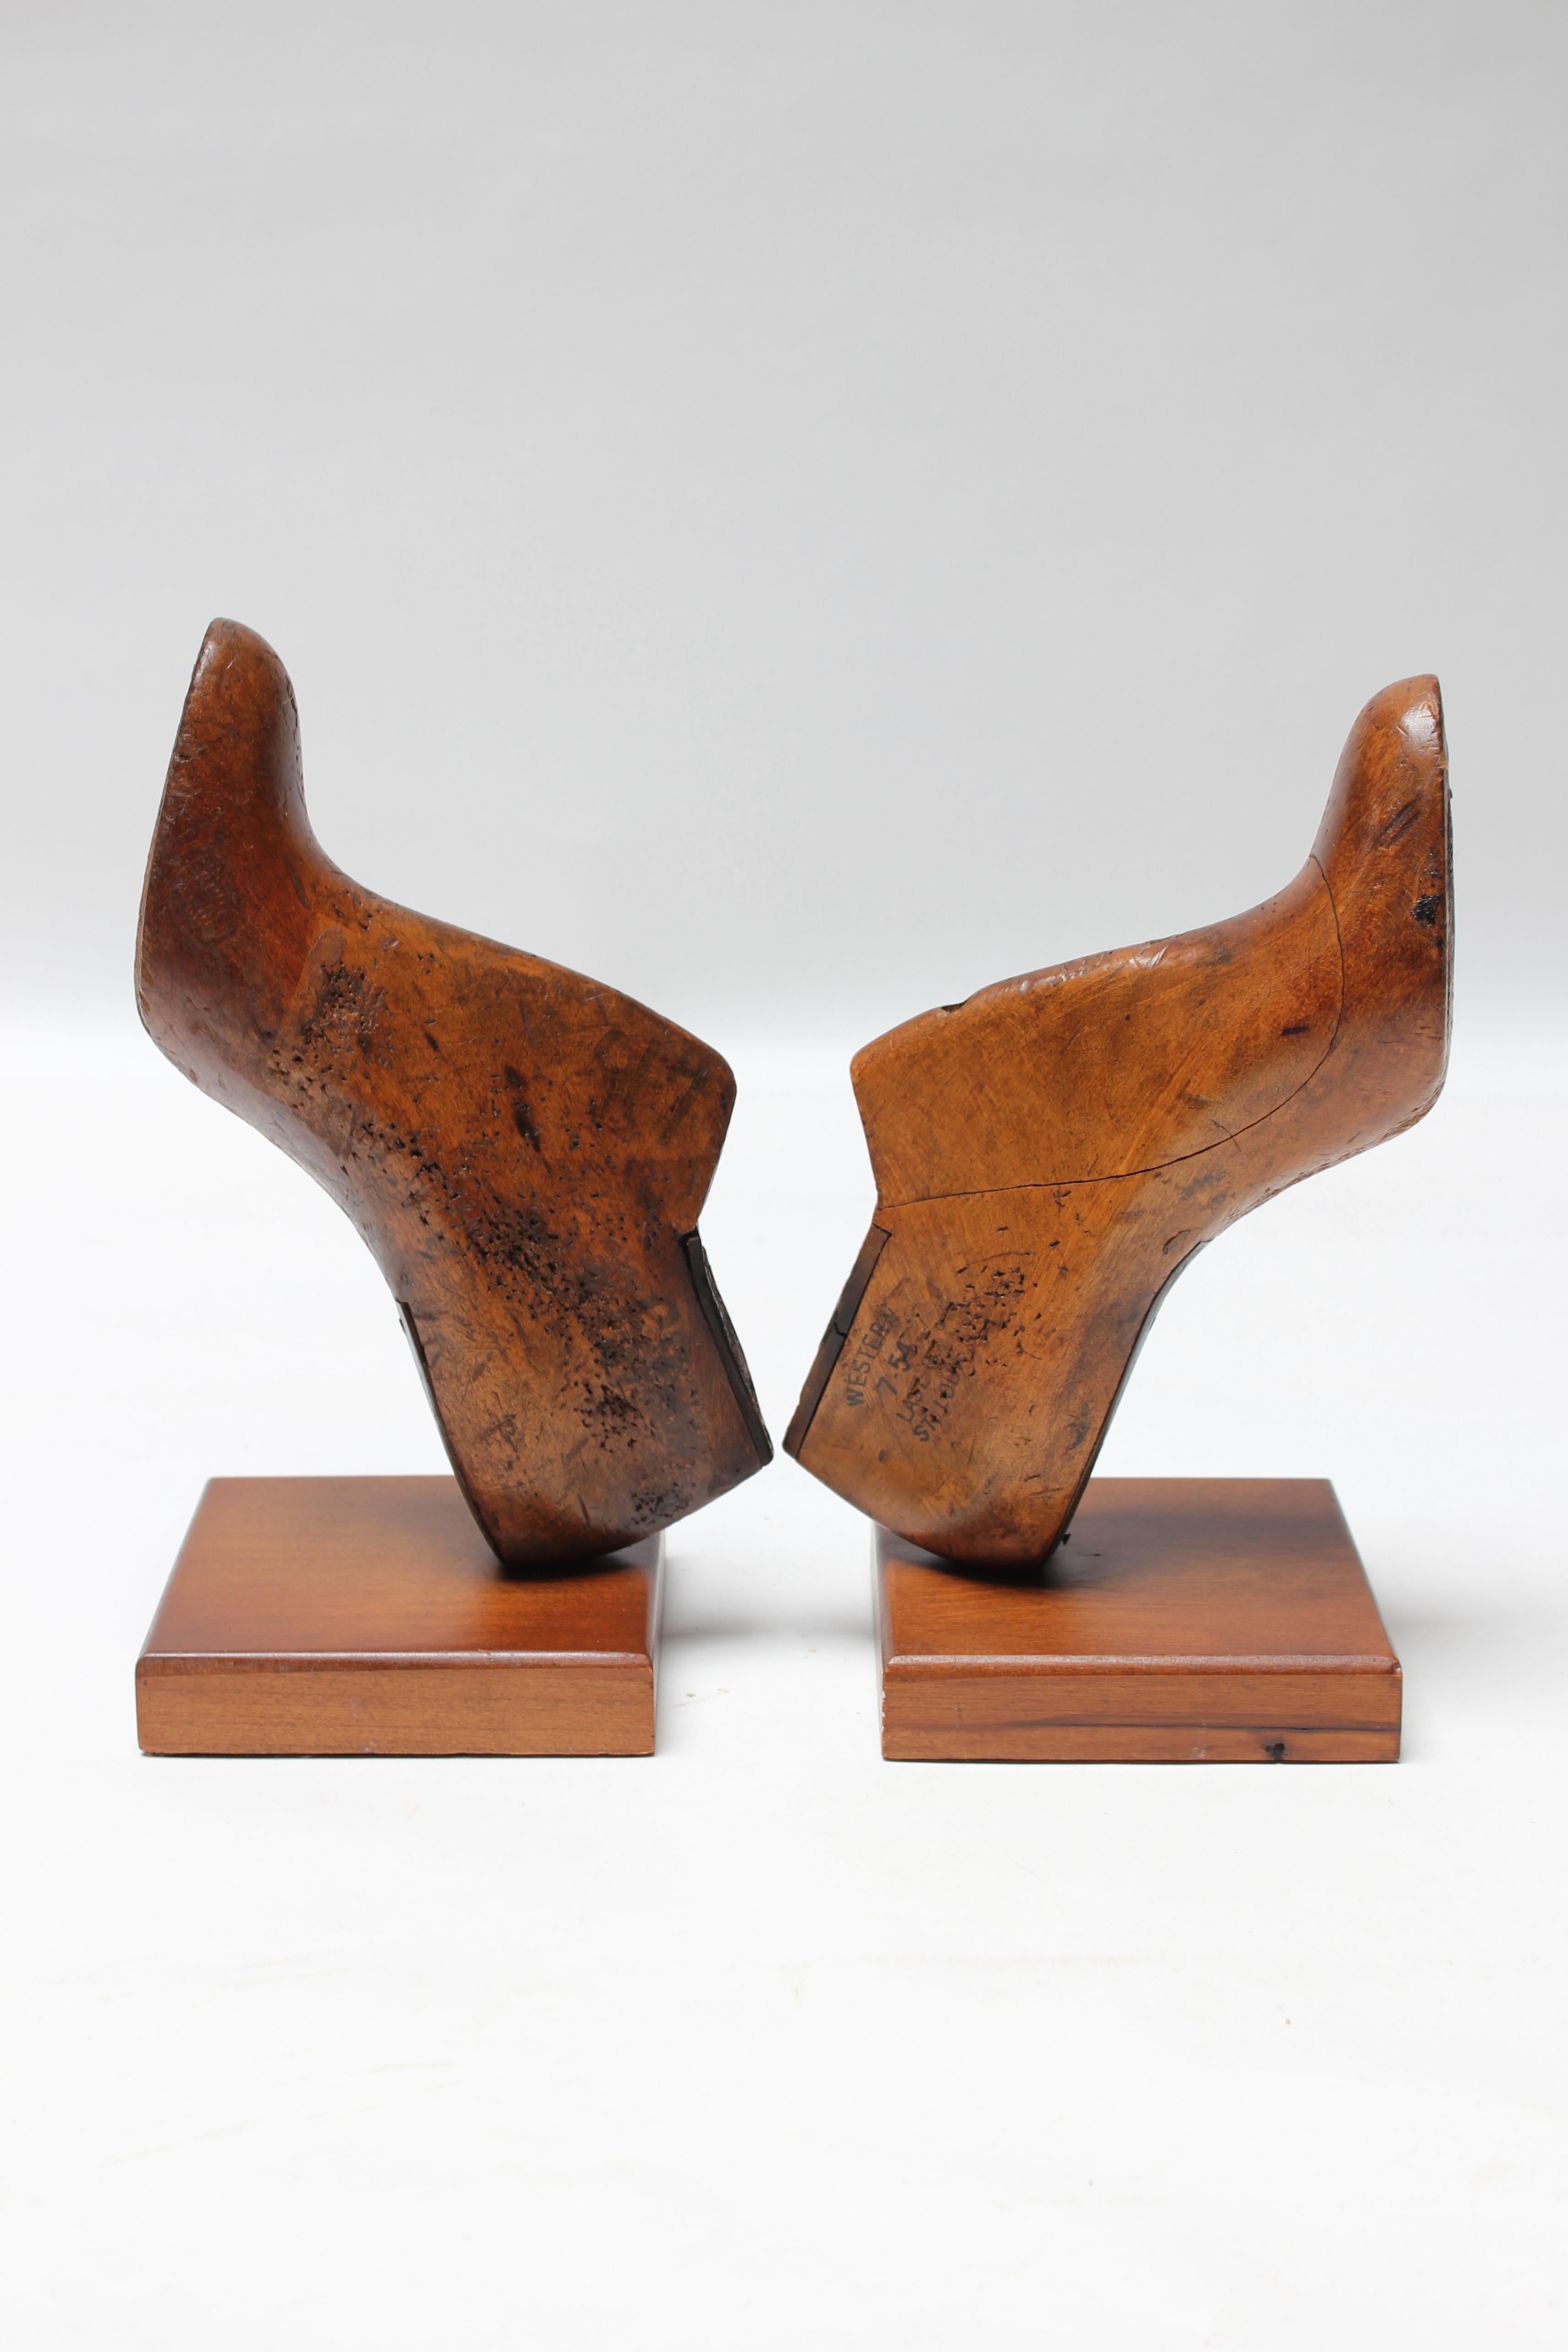 Pair of women's size 6 cobbler shoe forms converted to bookends (circa 1930s St. Louis, Missouri, USA). Since the shoes themselves were used as molds to make shoes, there are pin-pricks and wear present from frequent use in addition to naturally